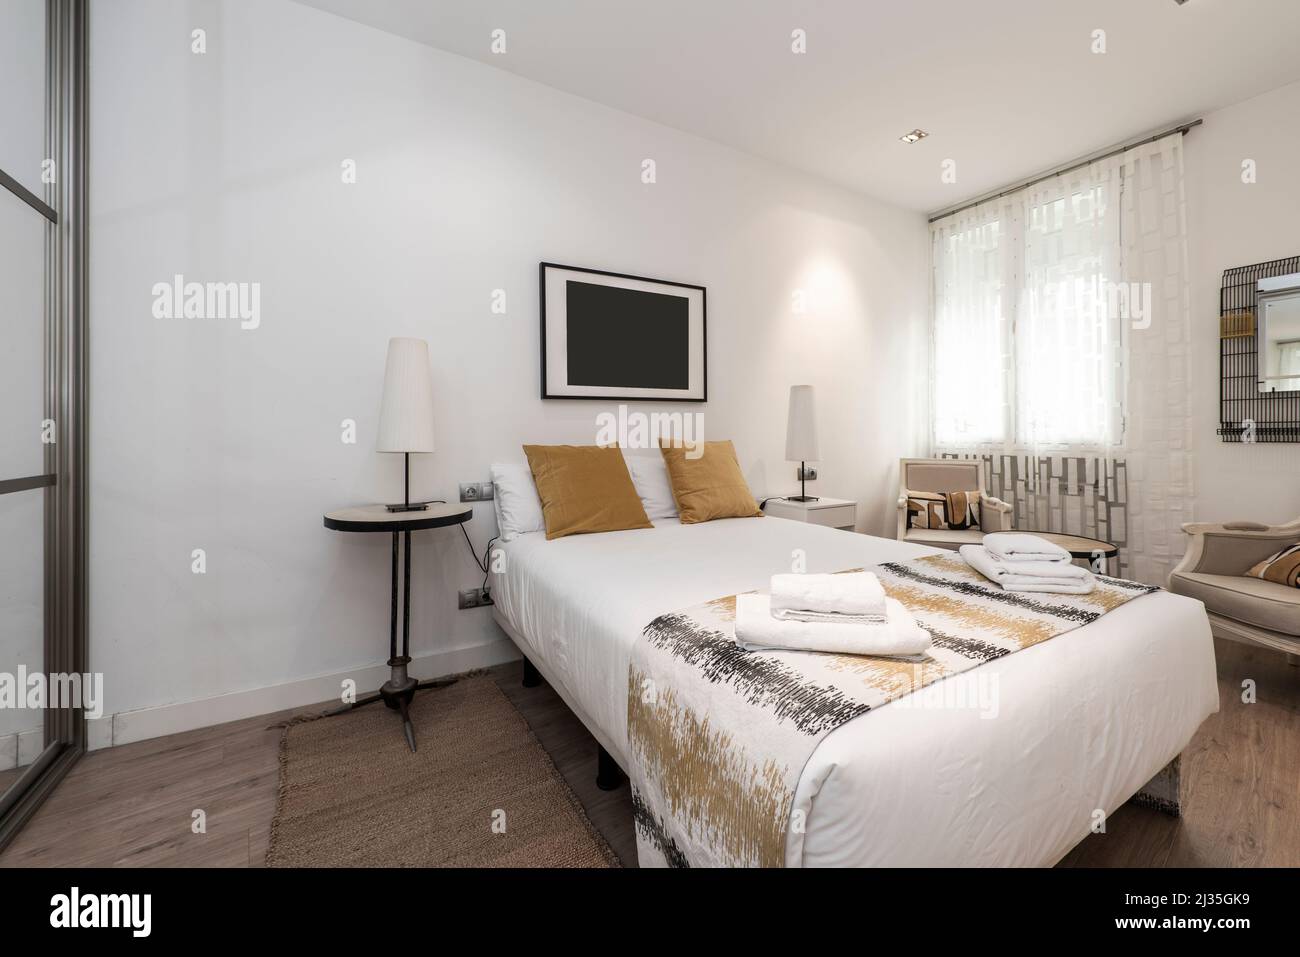 Bedroom with a large double bed with gold cushions, mismatched side tables, towels on the bed, and a wardrobe with mirrored sliding doors Stock Photo